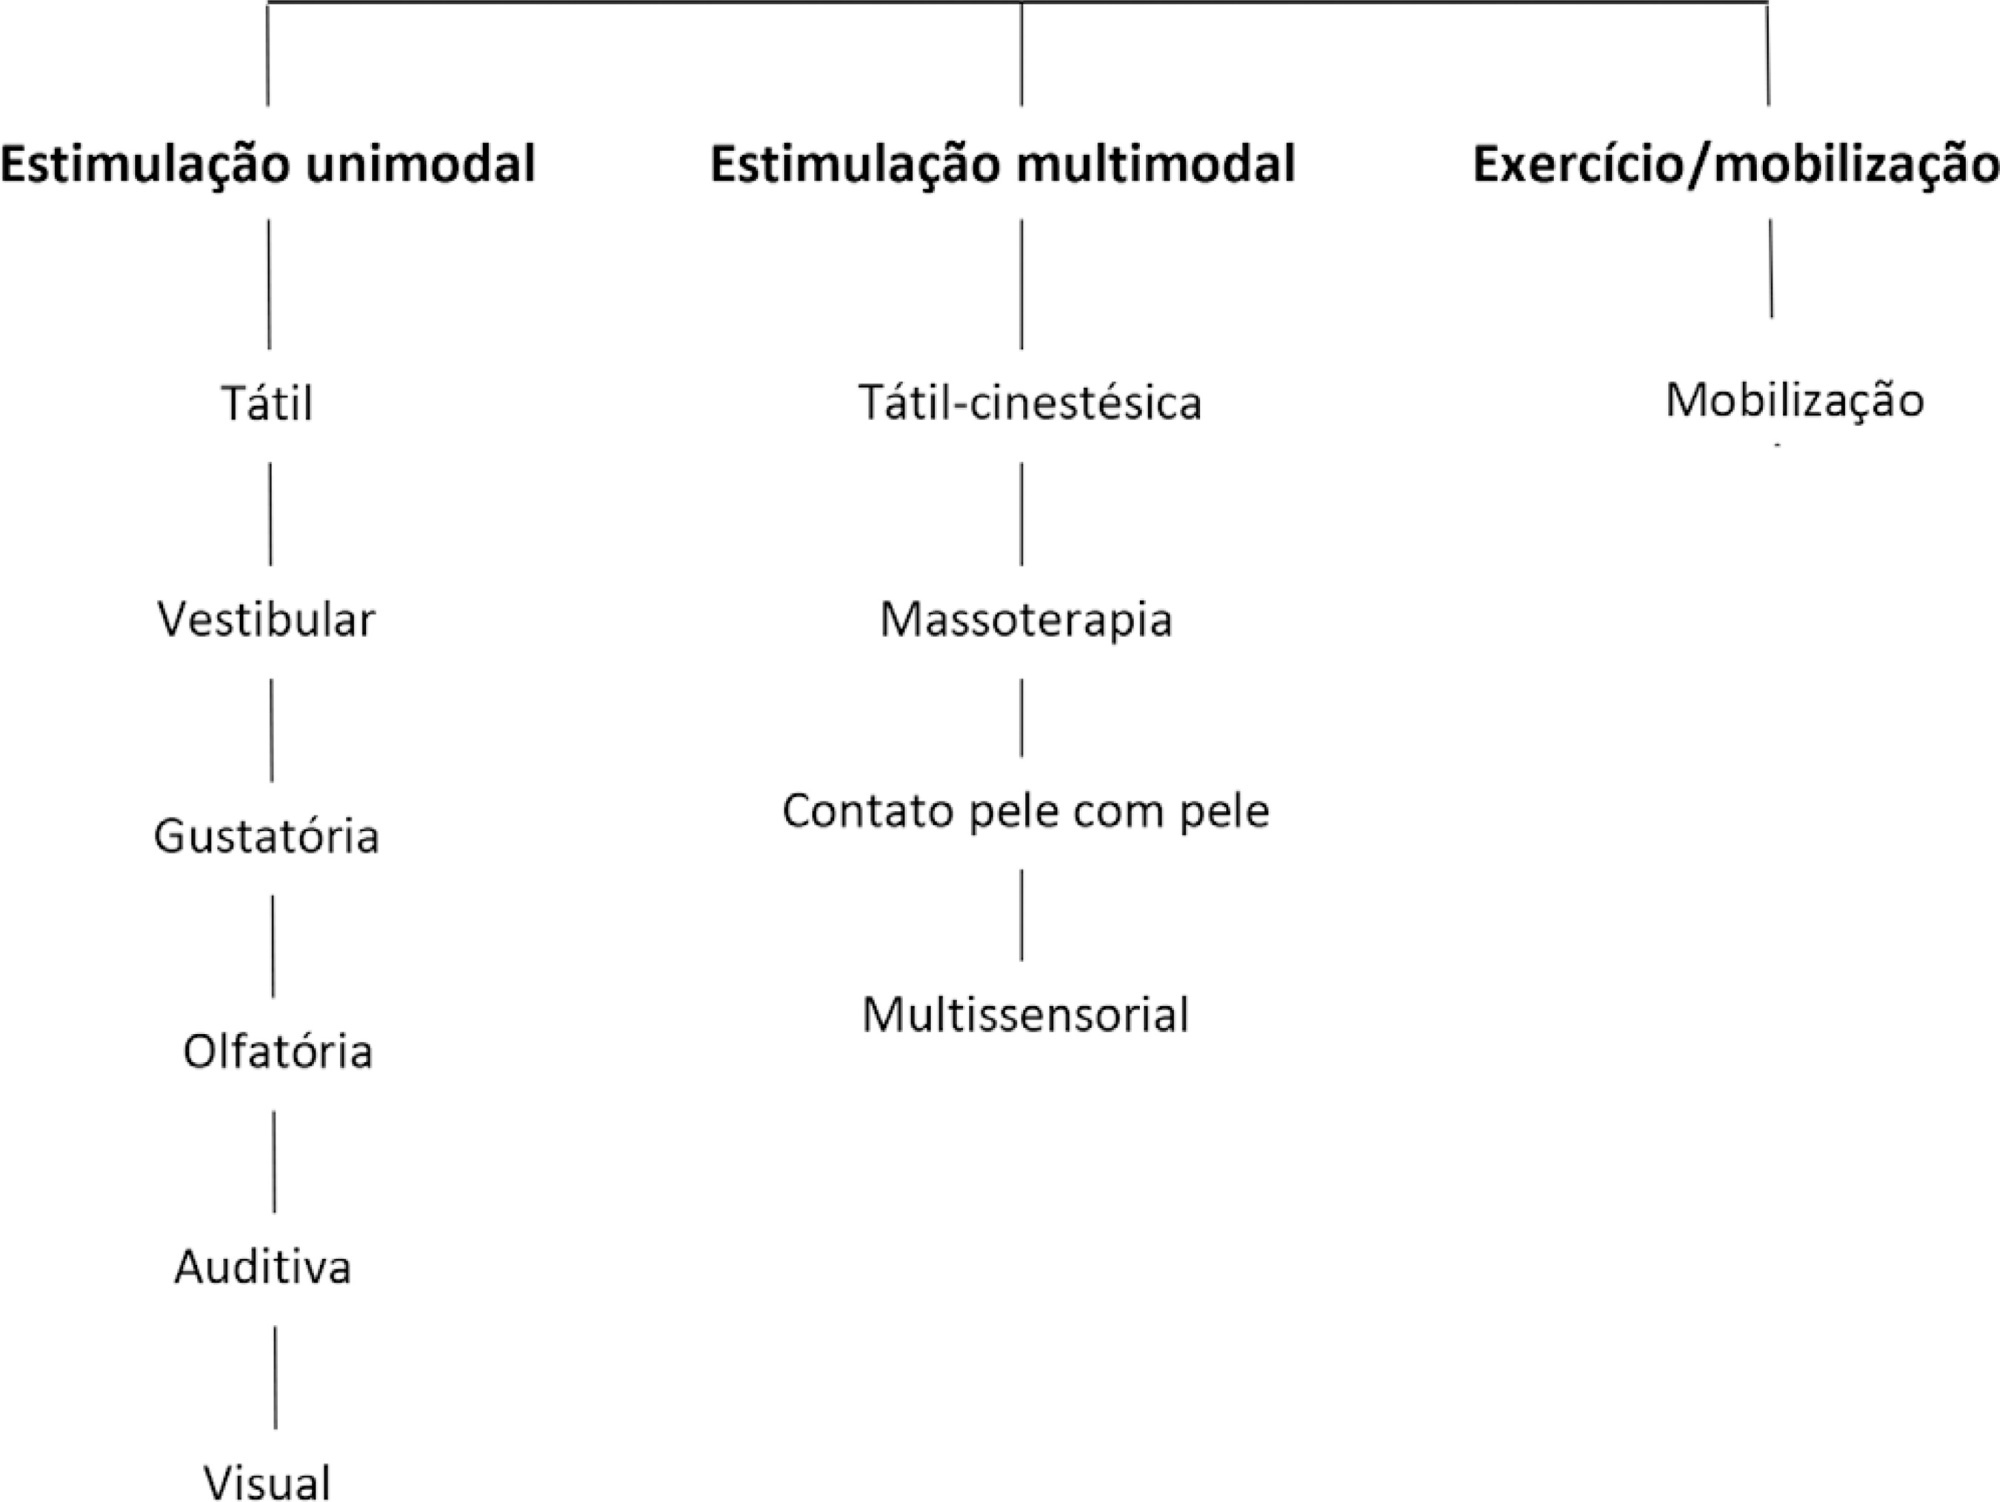 First Brazilian recommendation on physiotherapy with sensory motor stimulation in newborns and infants in the intensive care unit